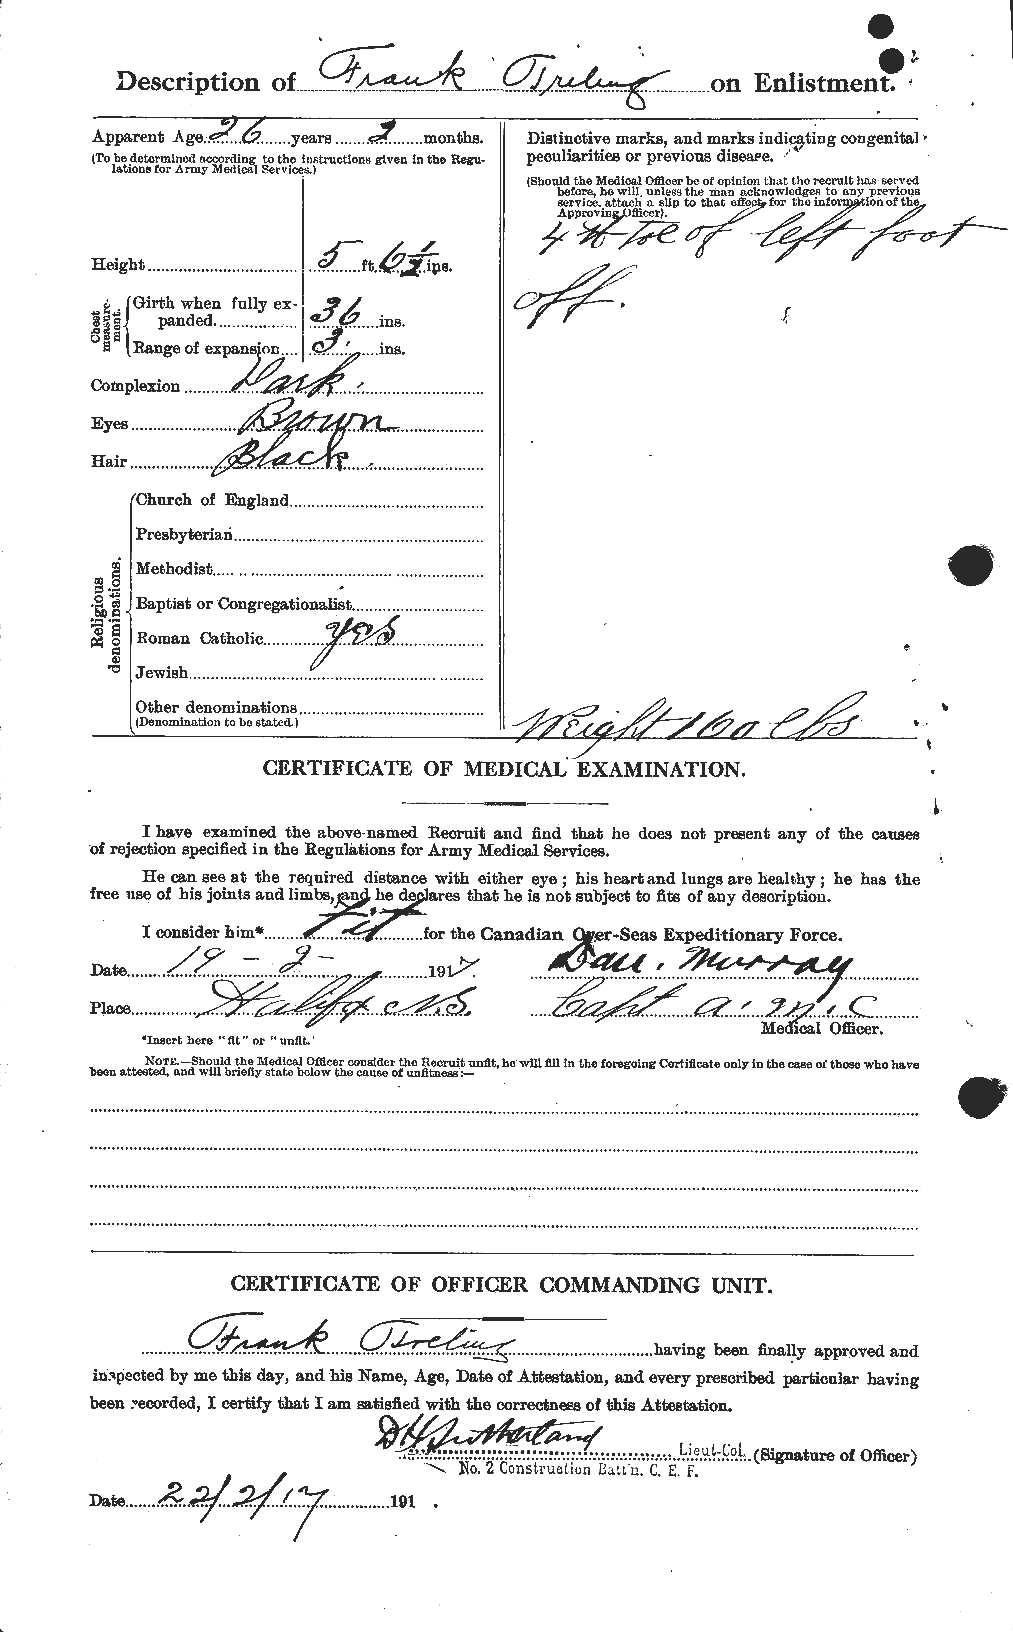 Personnel Records of the First World War - CEF 637499b